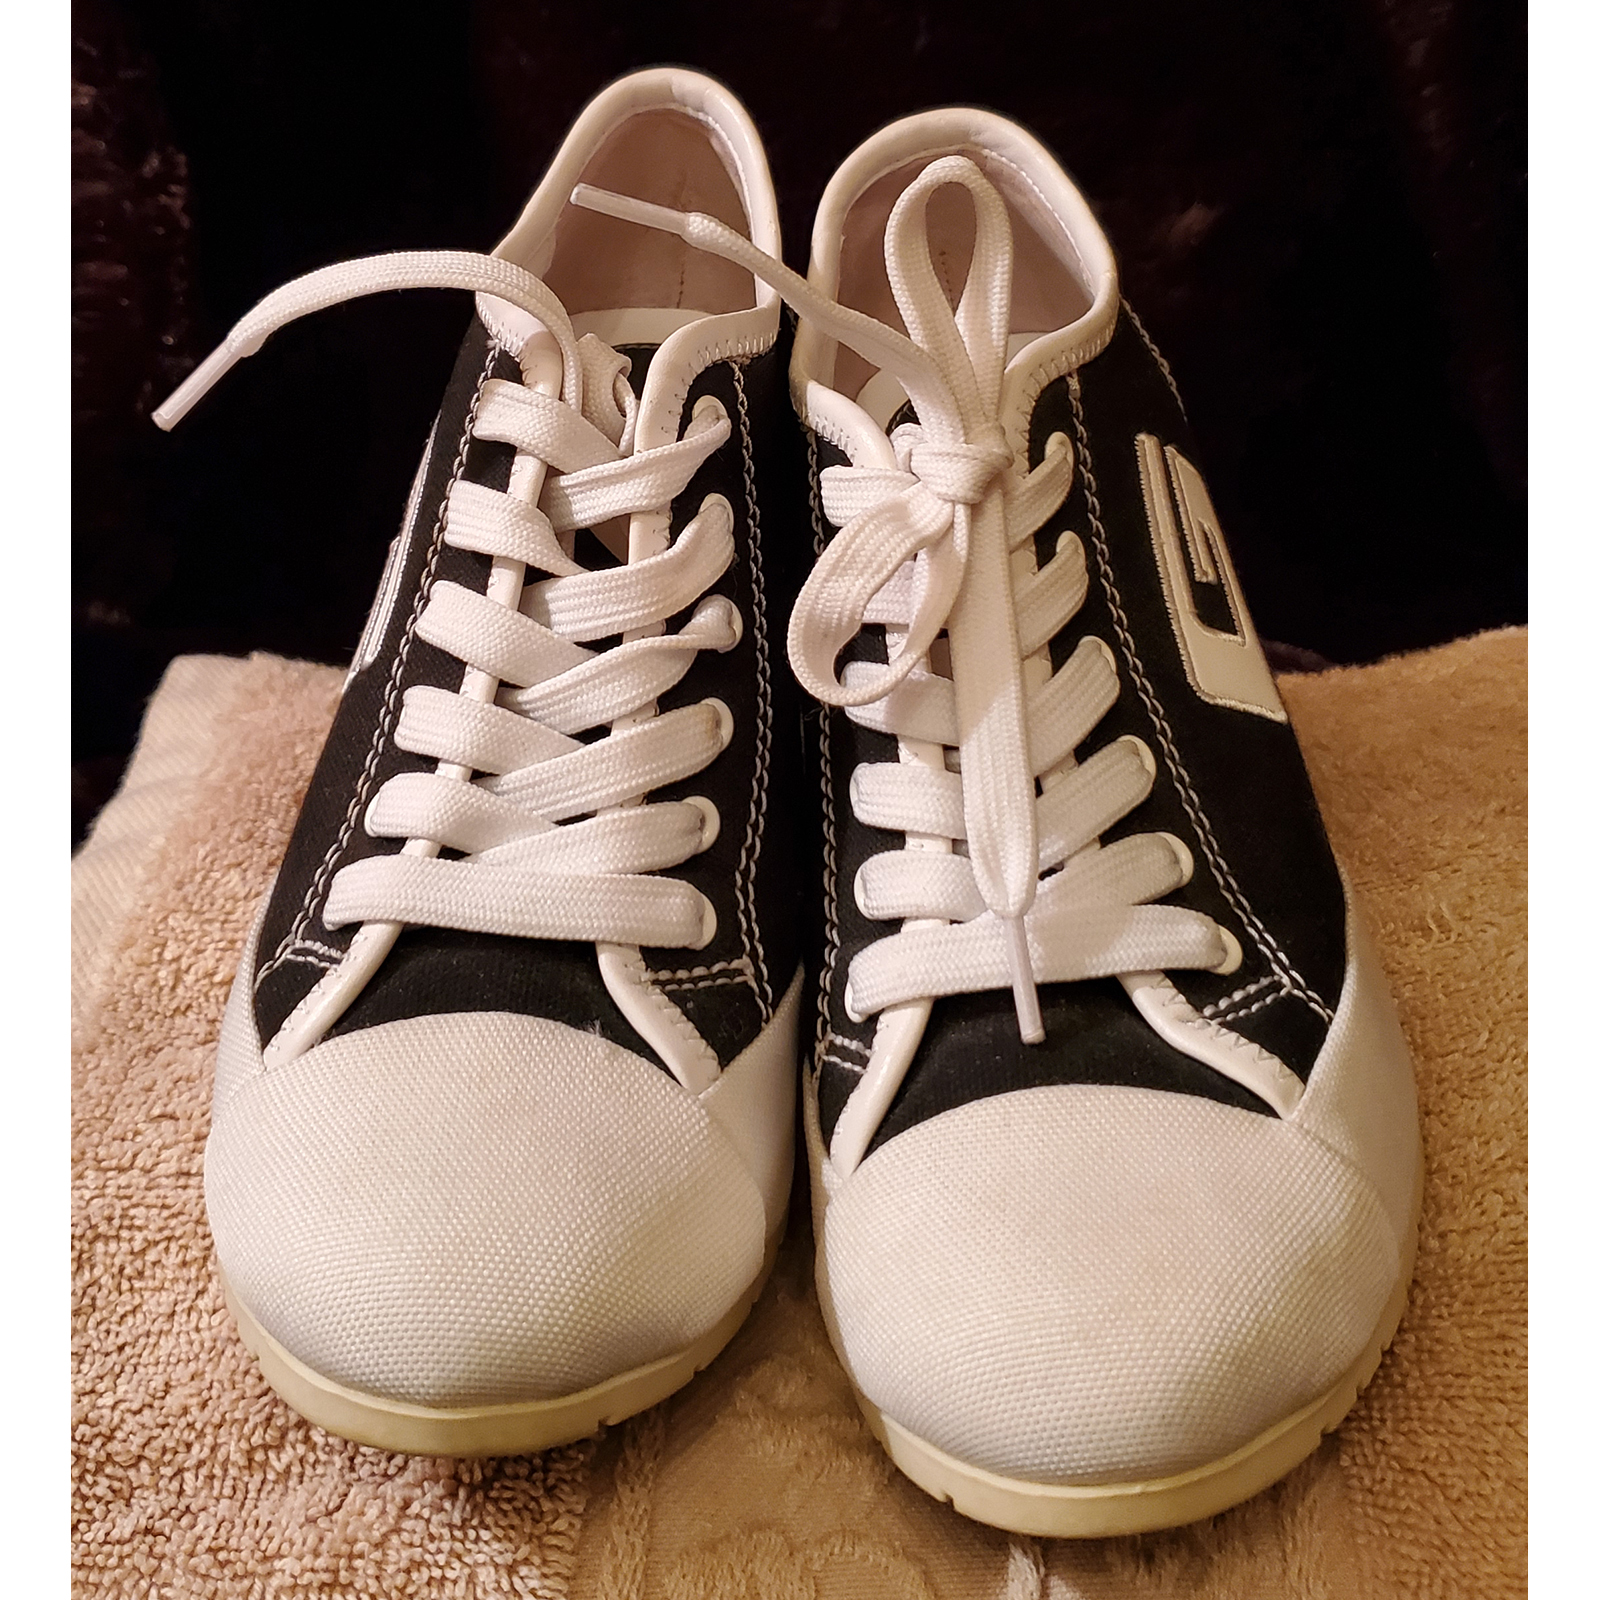 GUESS BLACK & WHITE HIGH-HEEL SNEAKERS